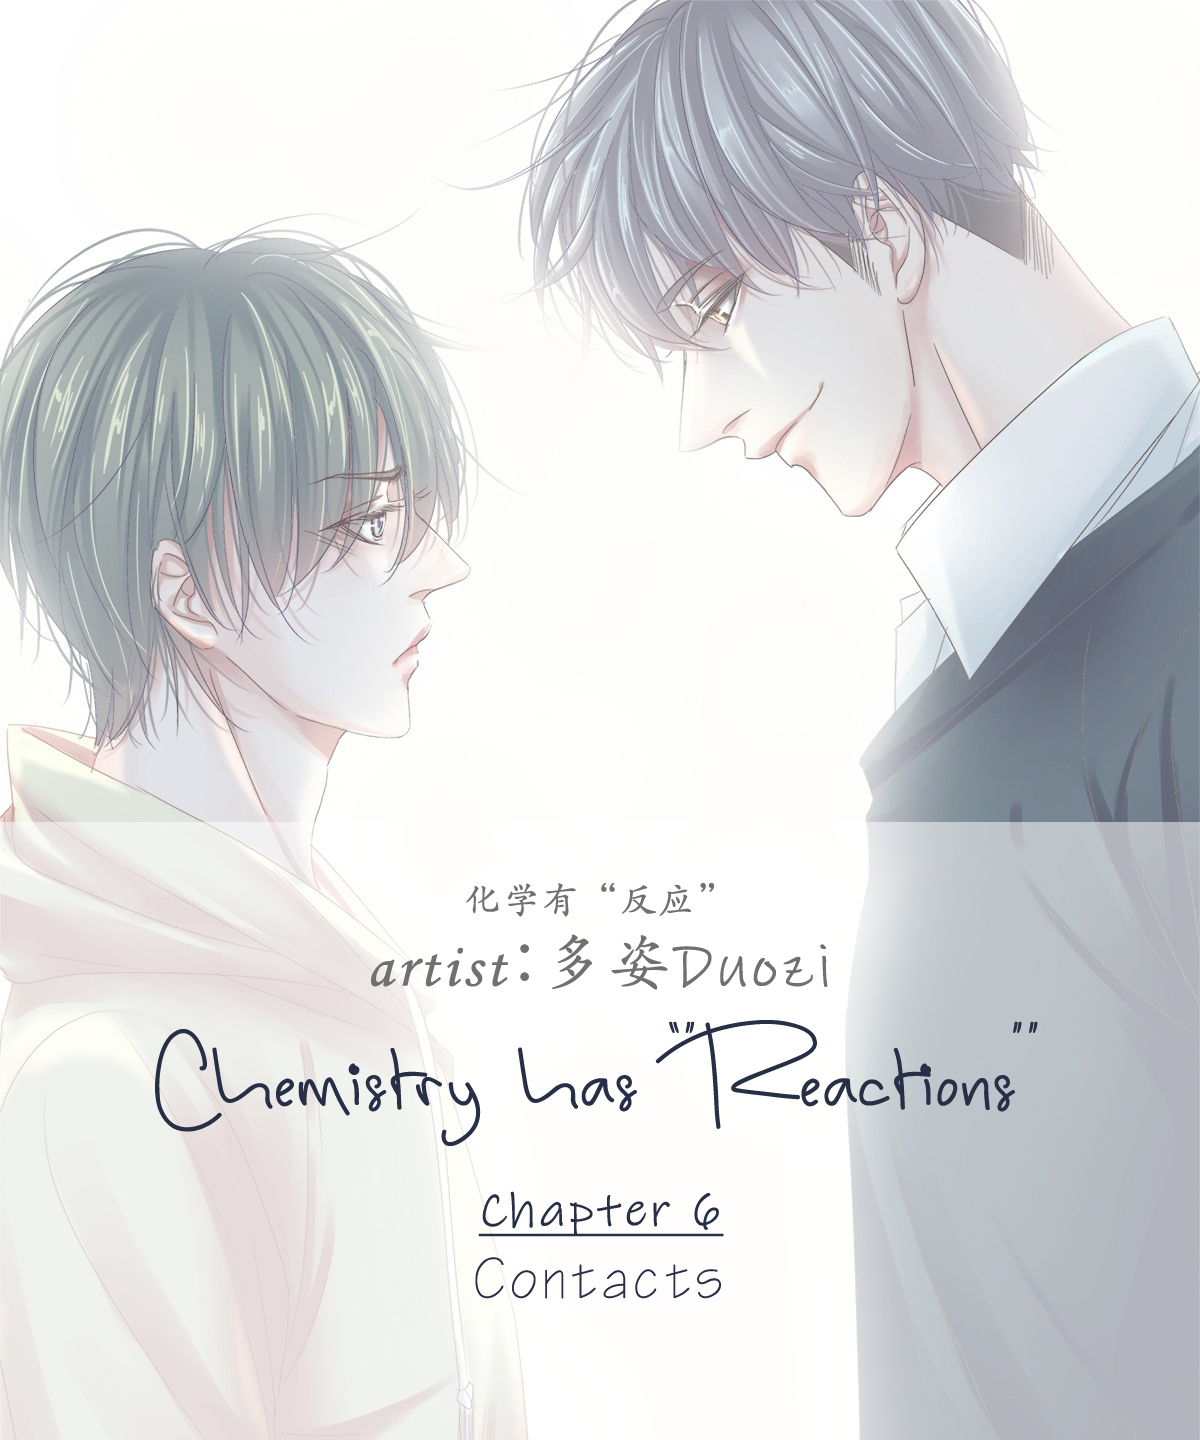 Chemistry has "Reactions" Vol. 1 Ch. 6